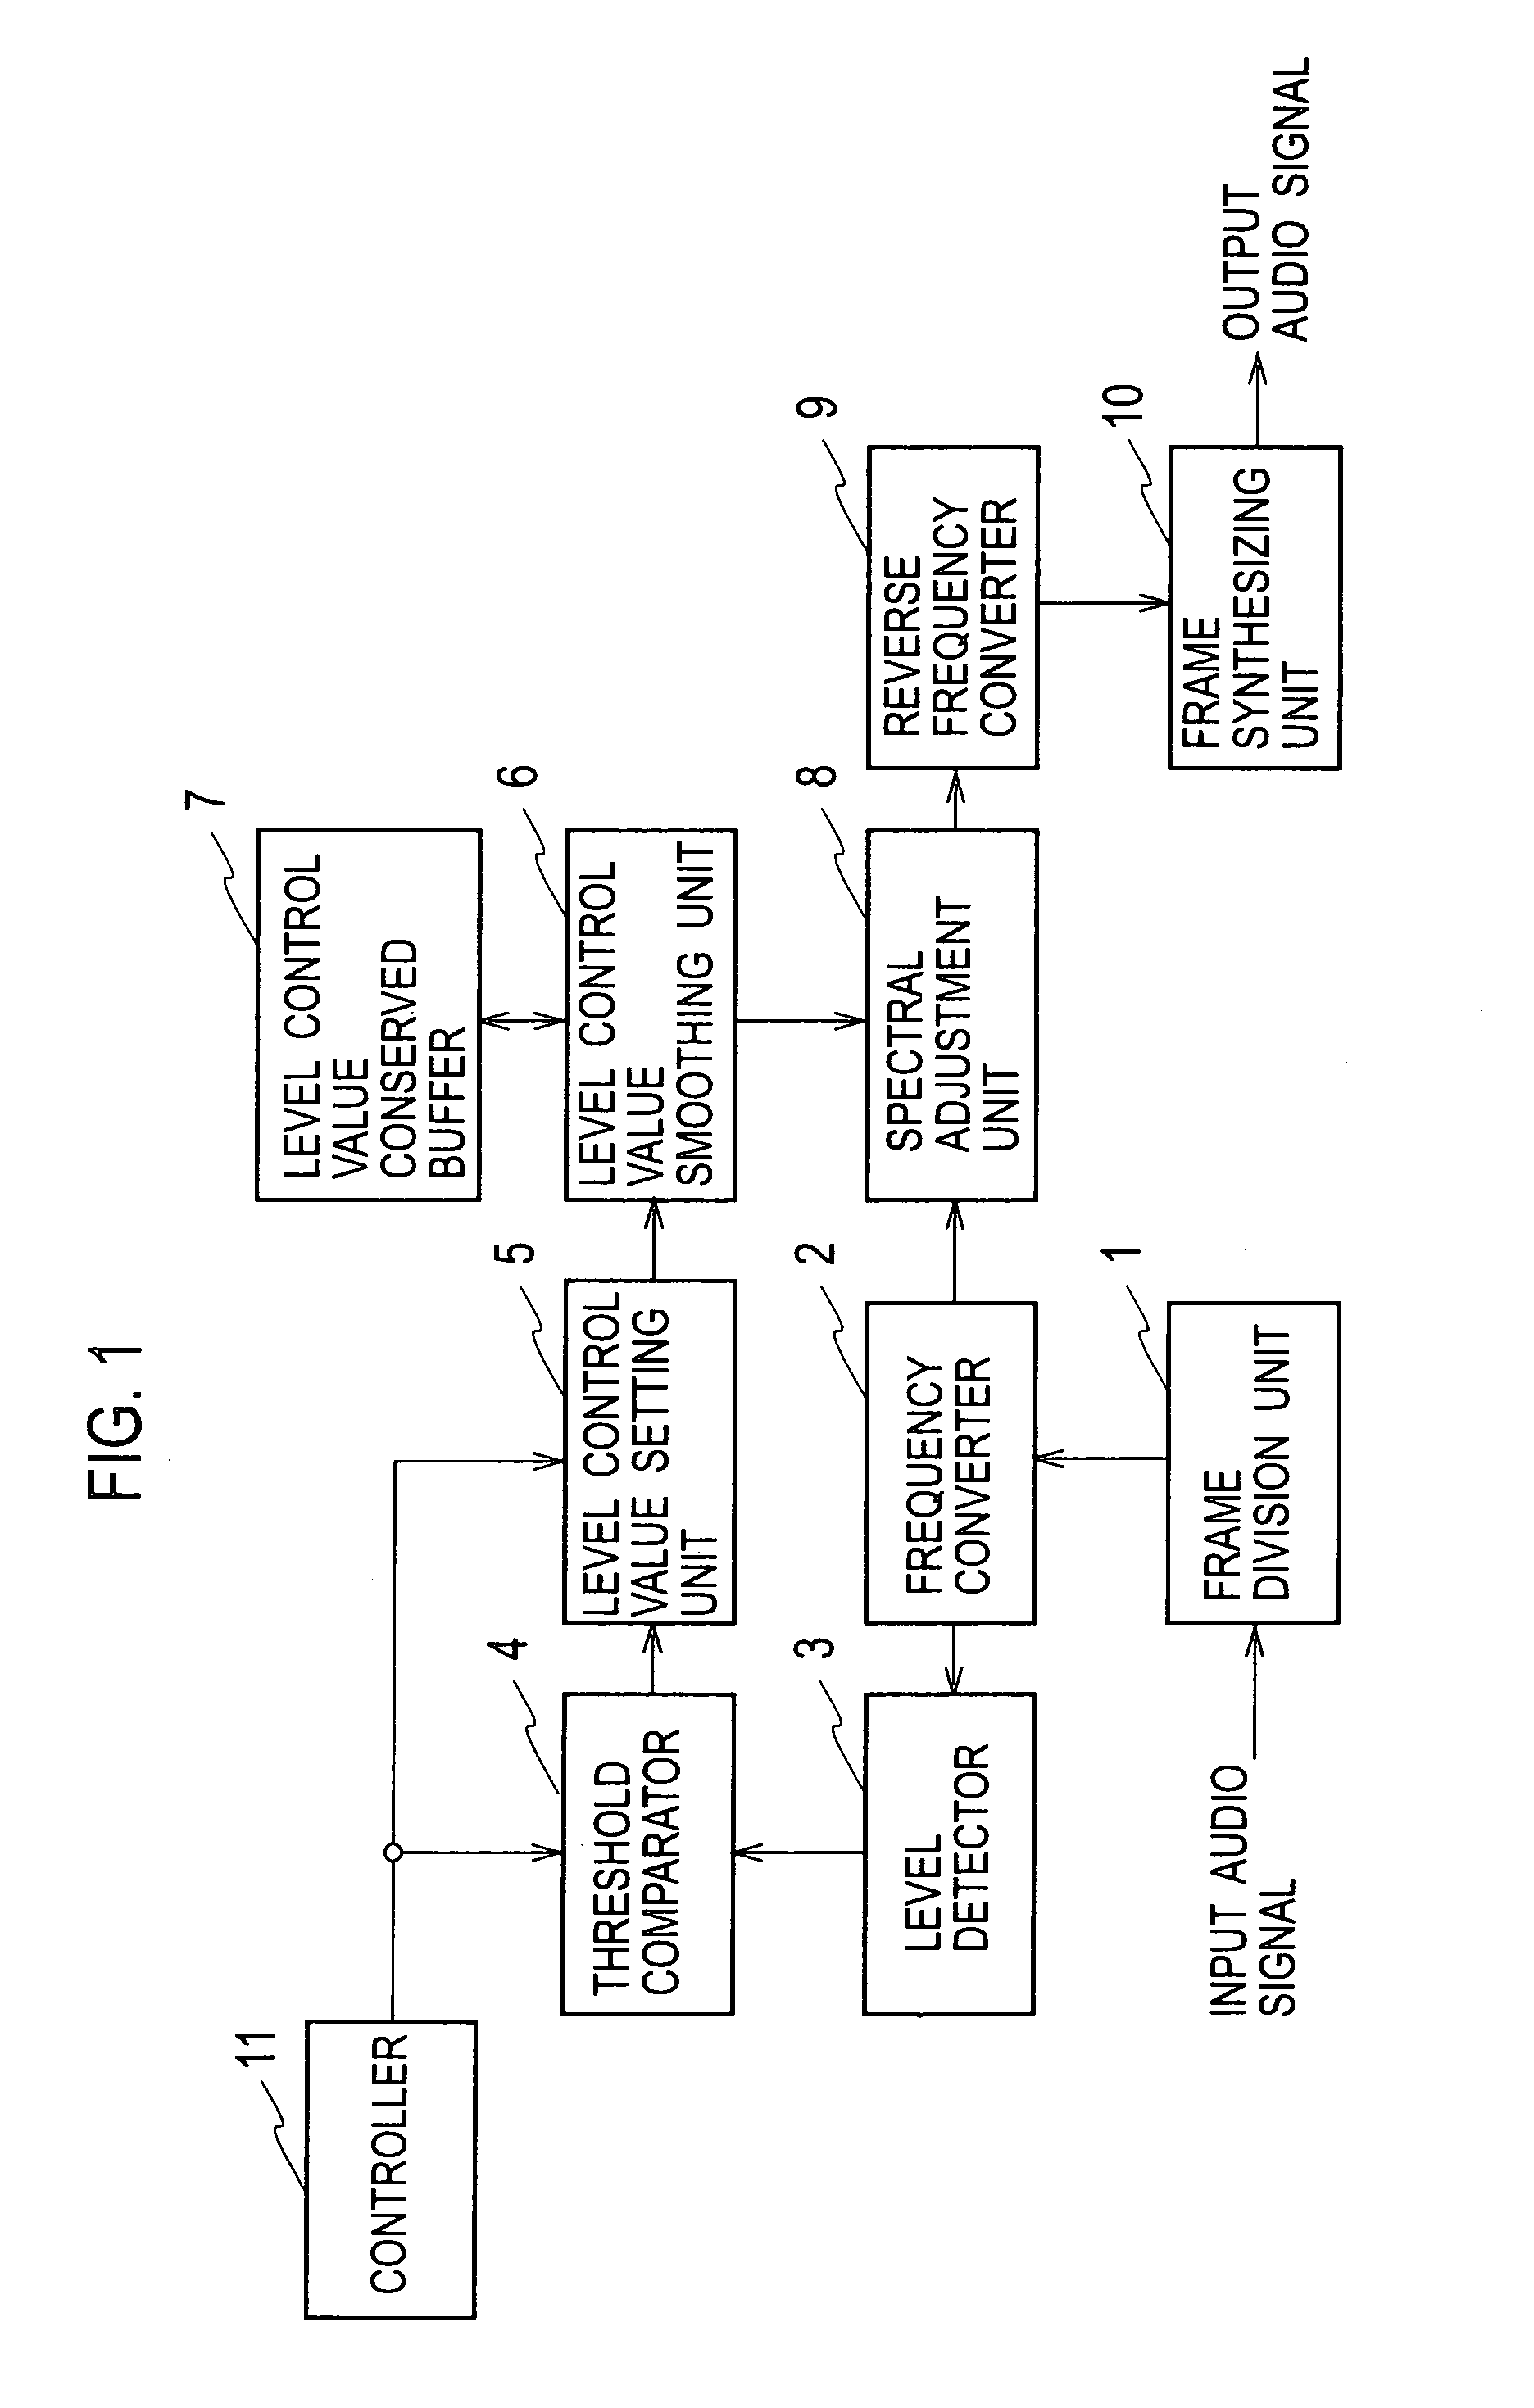 Audio signal processing device for noise reduction and audio enhancement, and method for the same